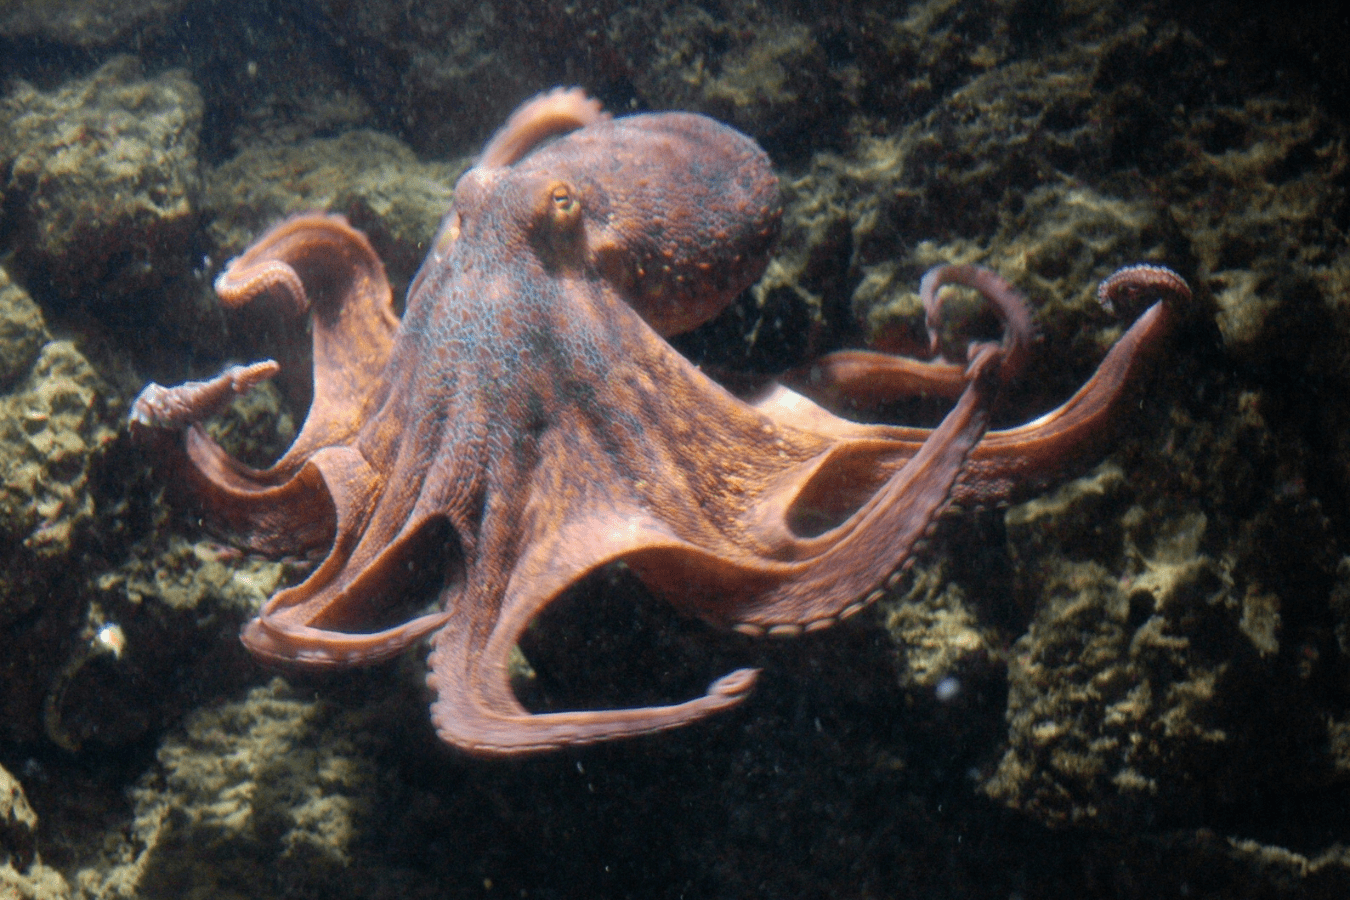 Dream About Octopus: What Does It Mean?